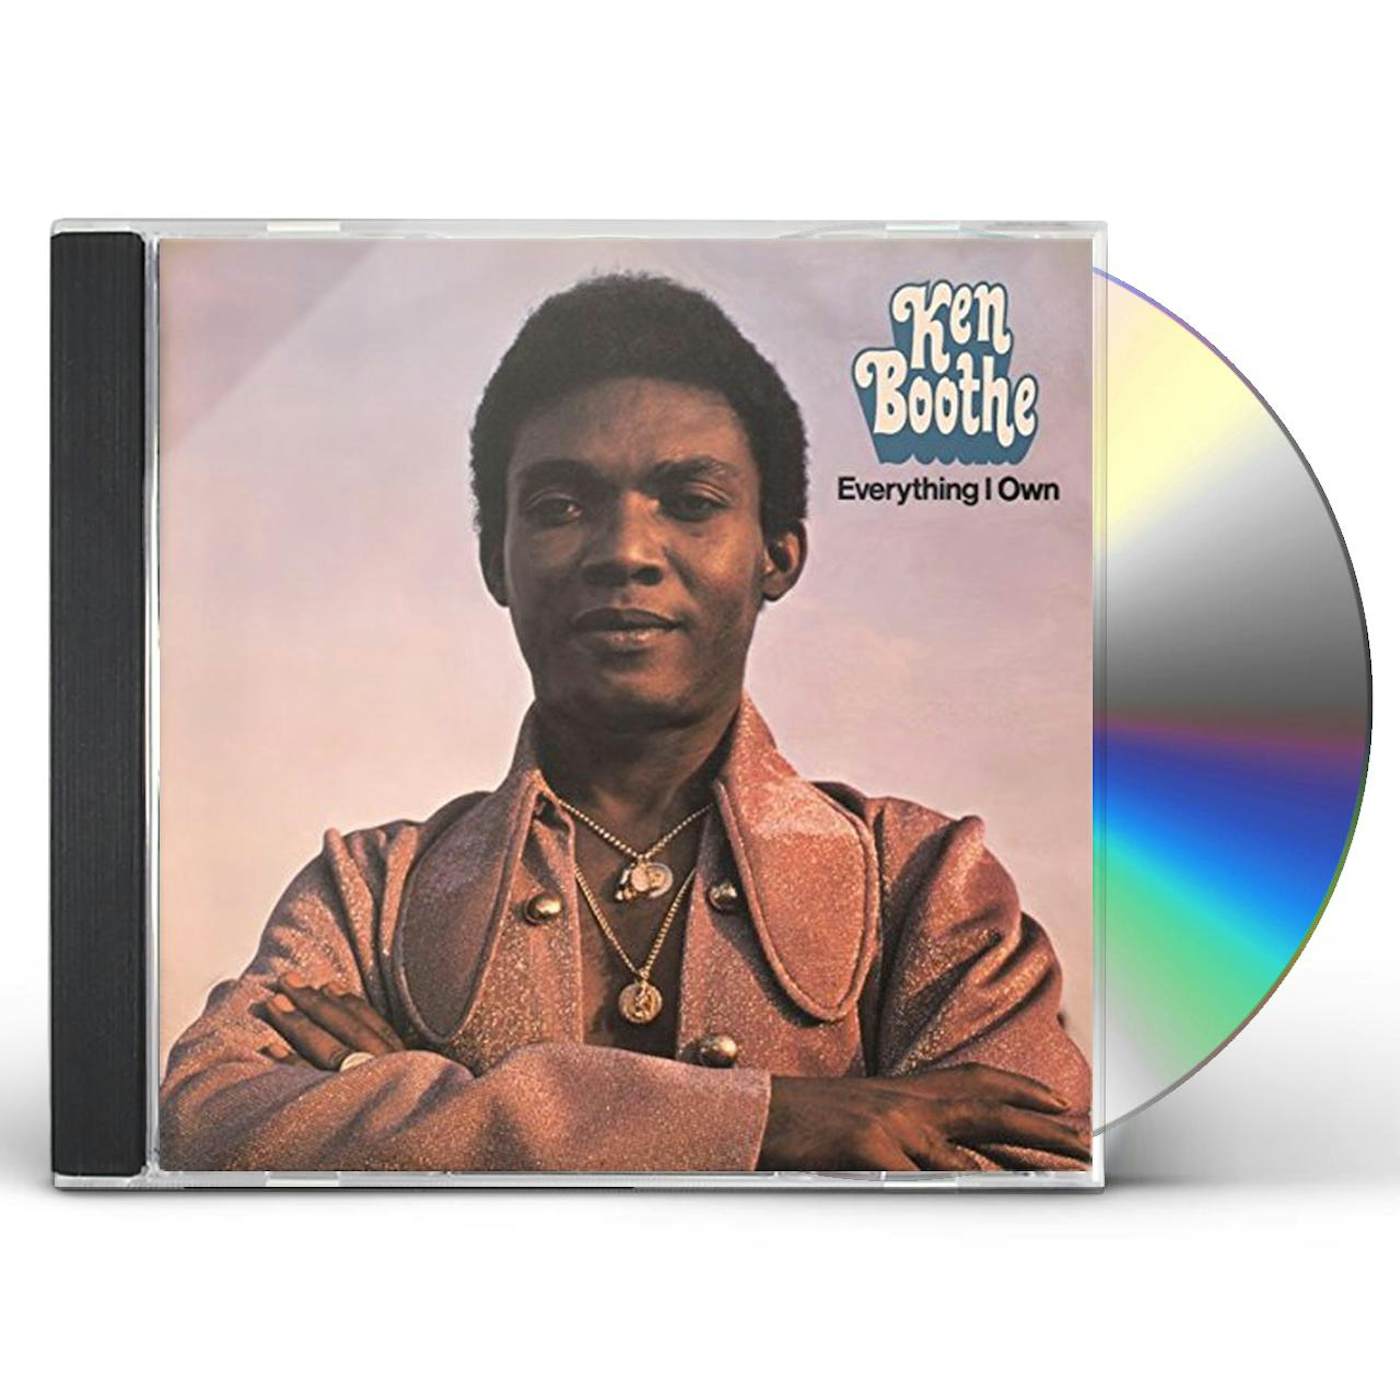 Ken Boothe EVERYTHING I OWN CD